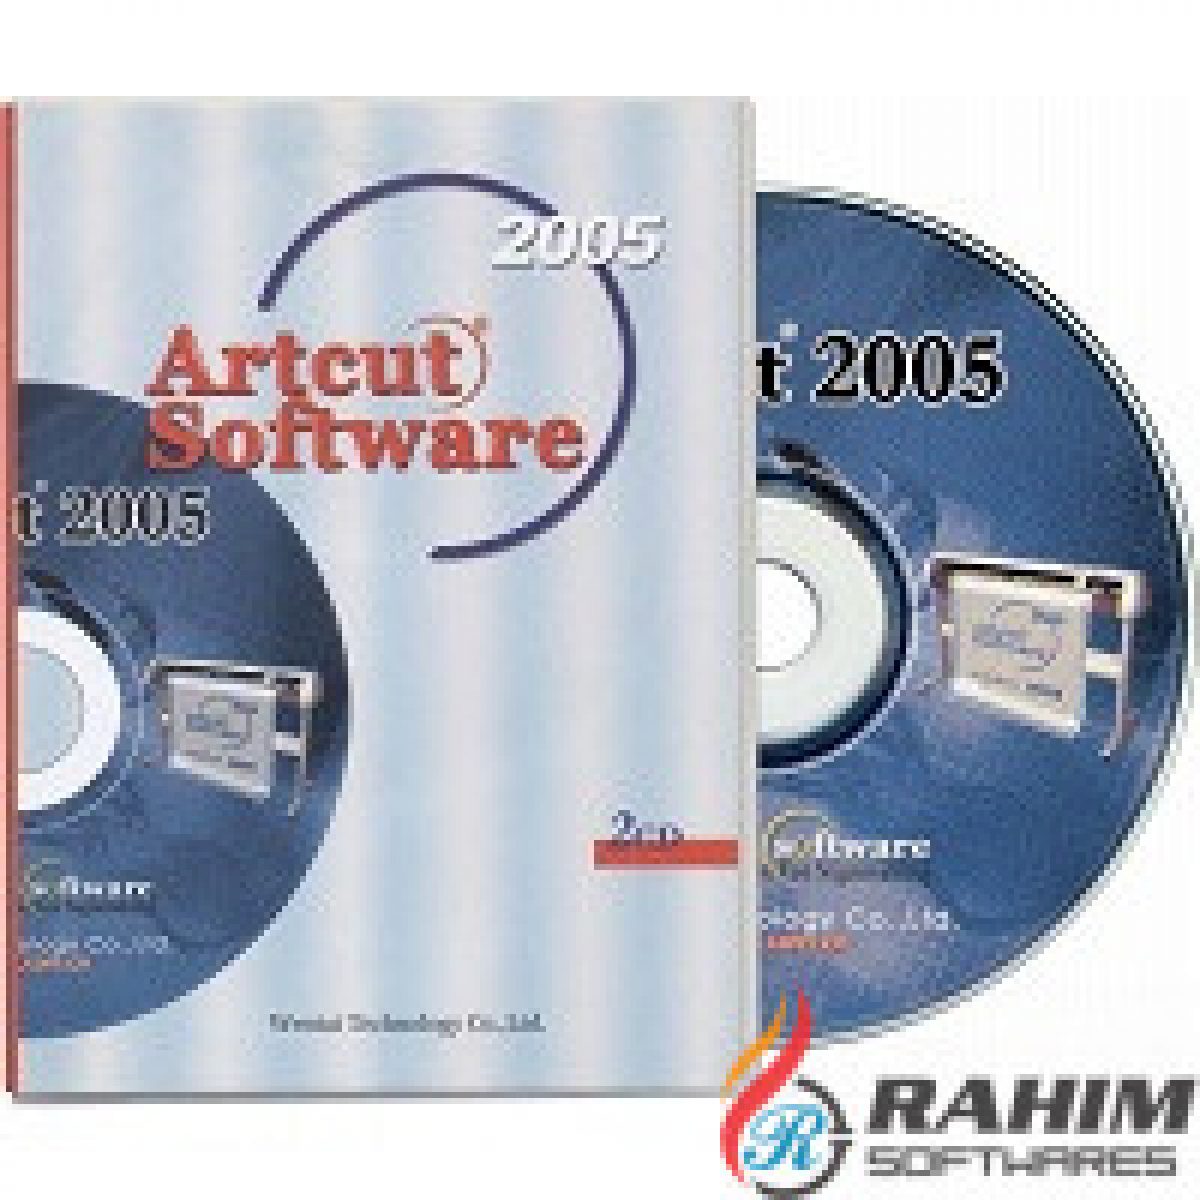 artcut 2009 software free download with crack